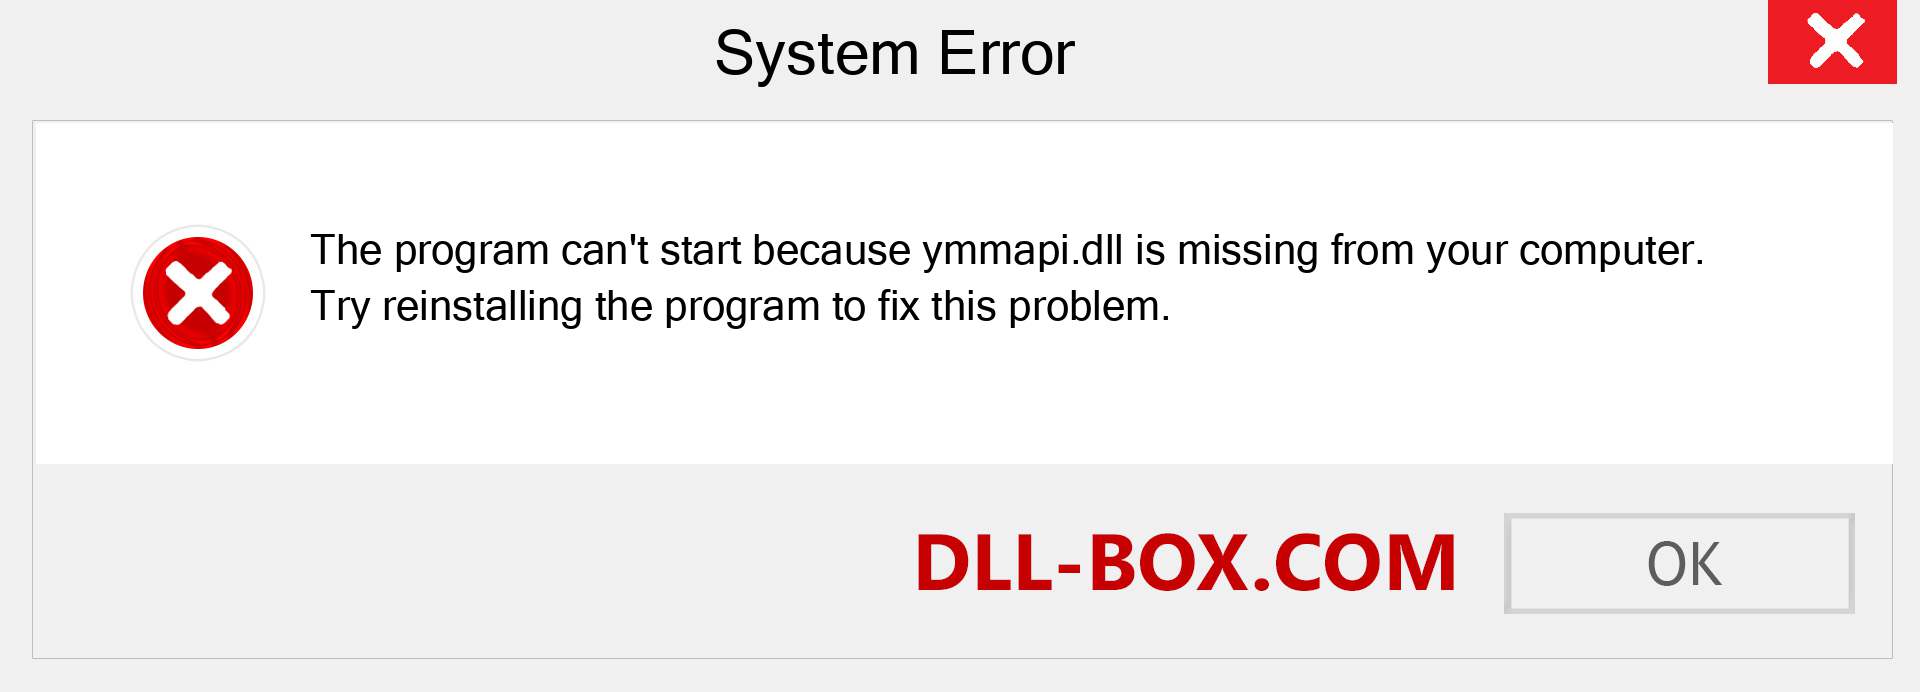  ymmapi.dll file is missing?. Download for Windows 7, 8, 10 - Fix  ymmapi dll Missing Error on Windows, photos, images